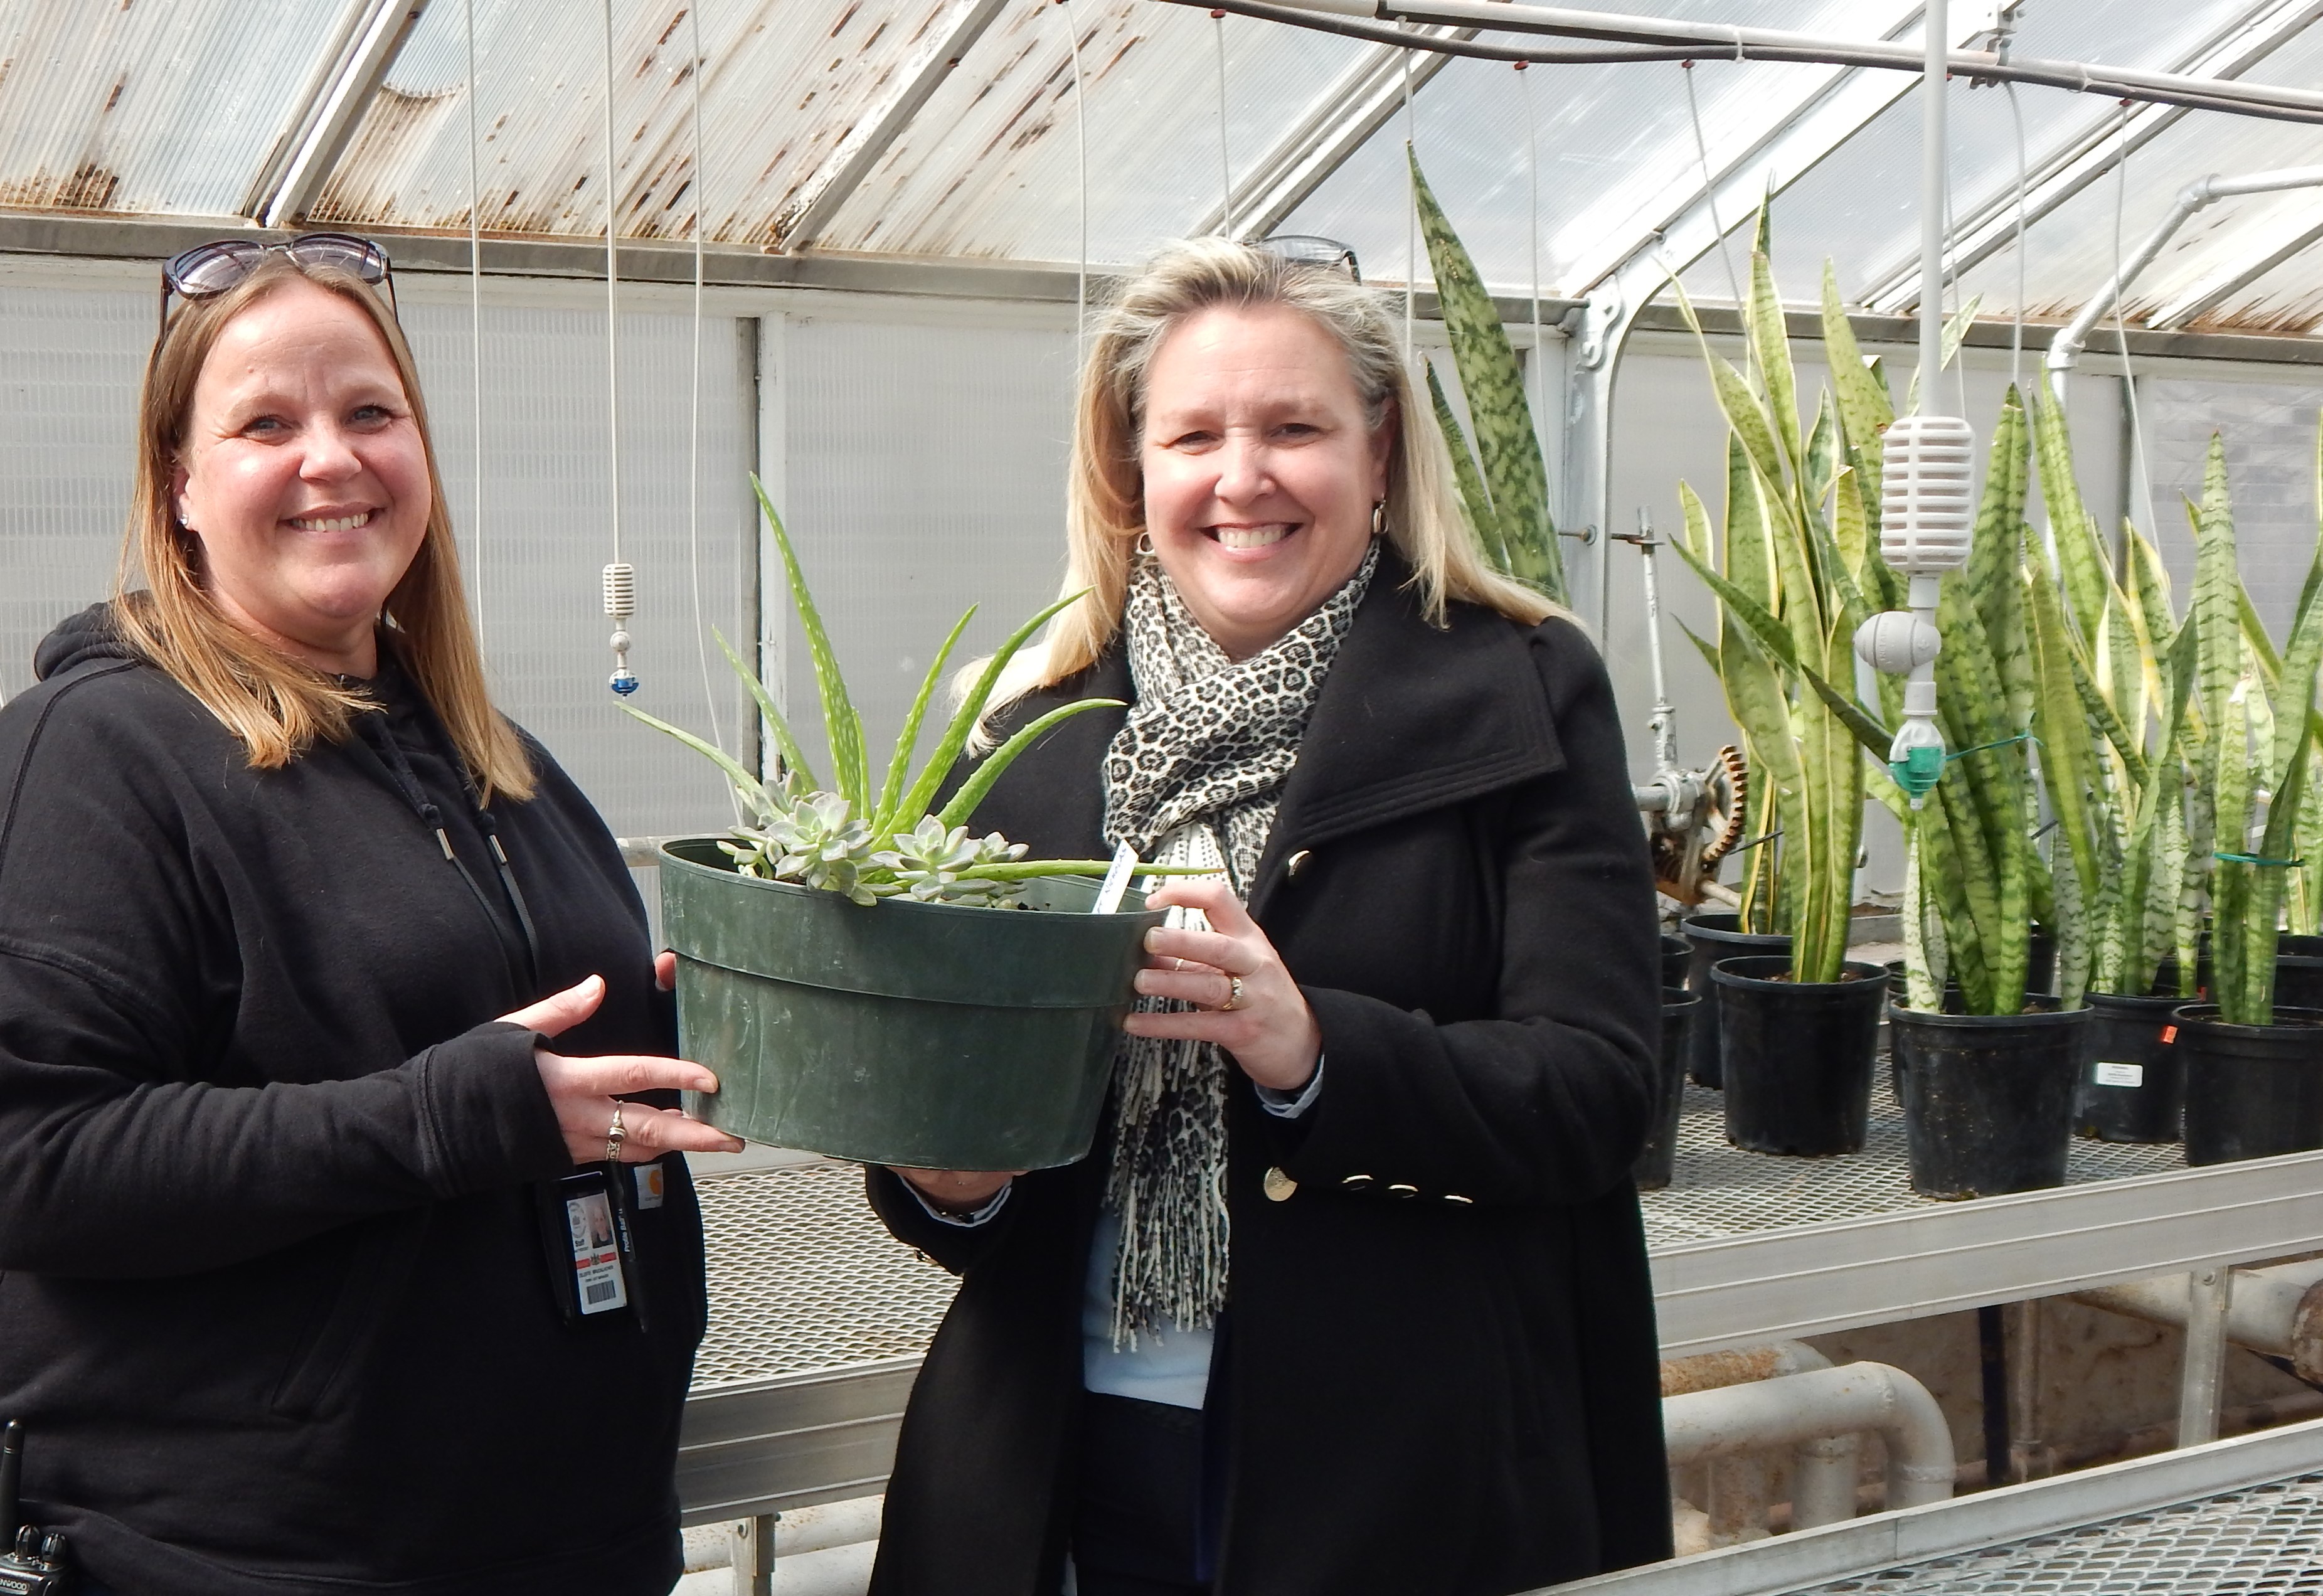 Two people in a greenhouse holding a plant